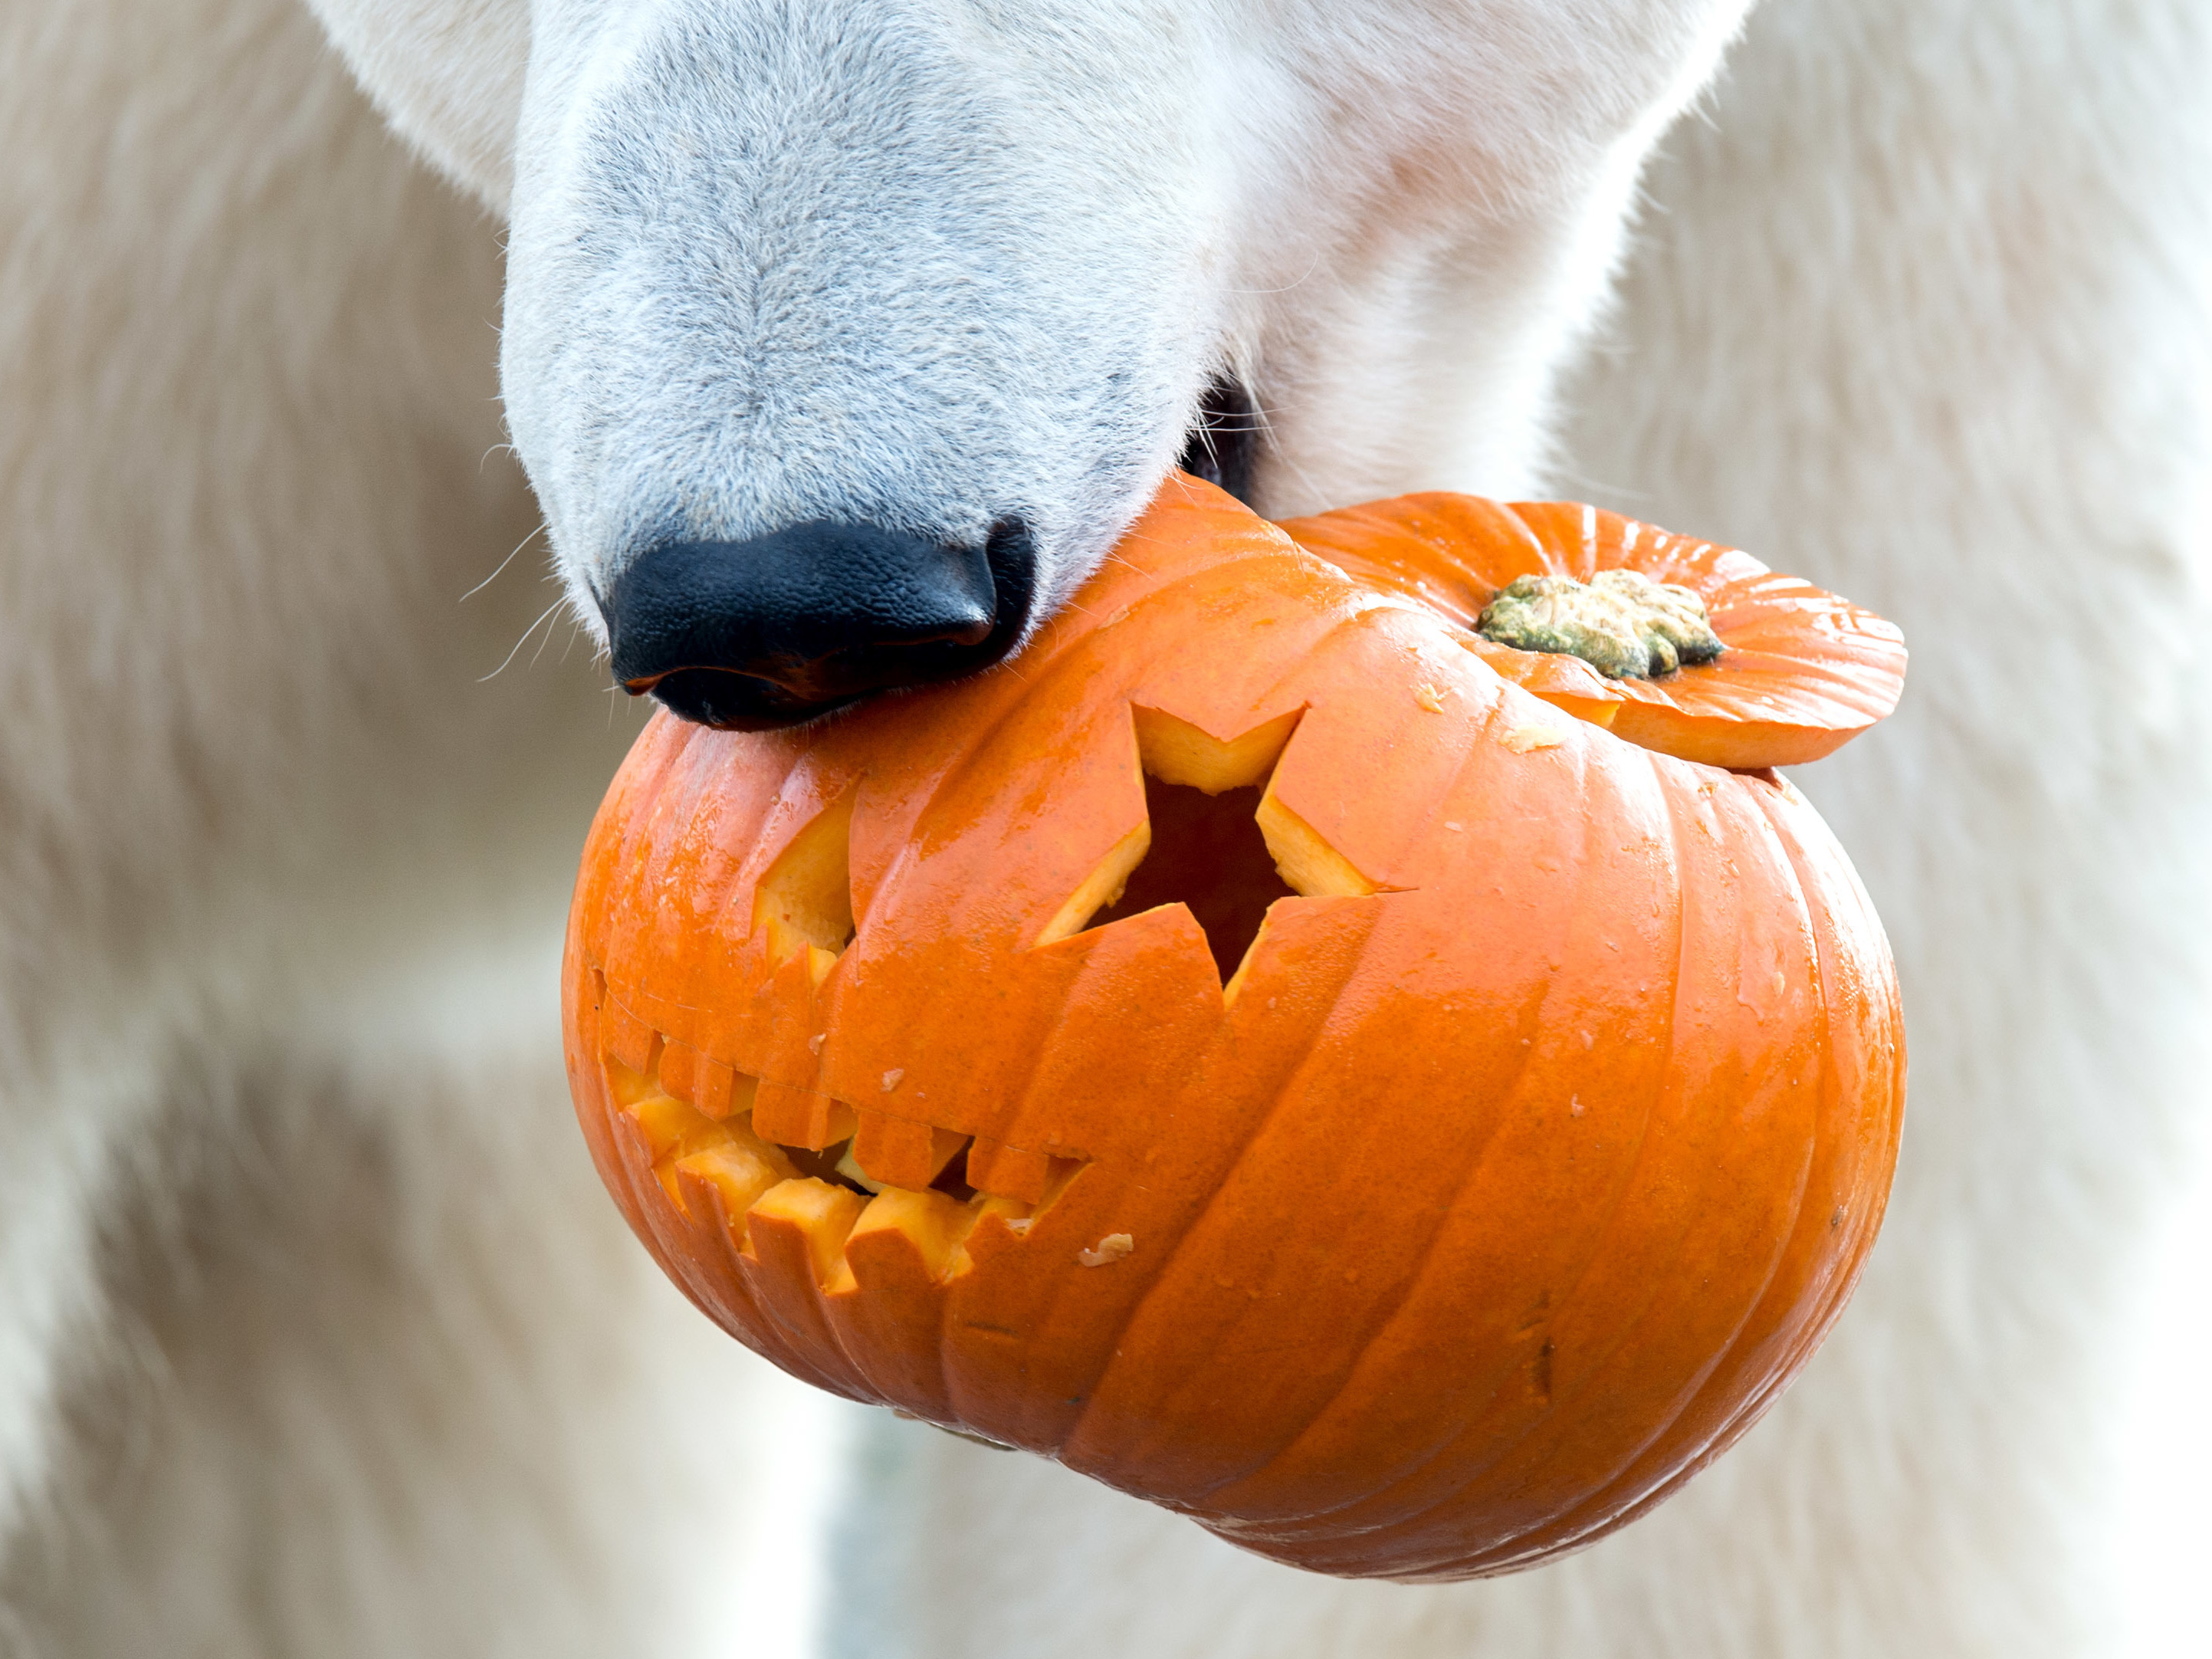 It's not Halloween without some zoo animals smashing pumpkins - OPB